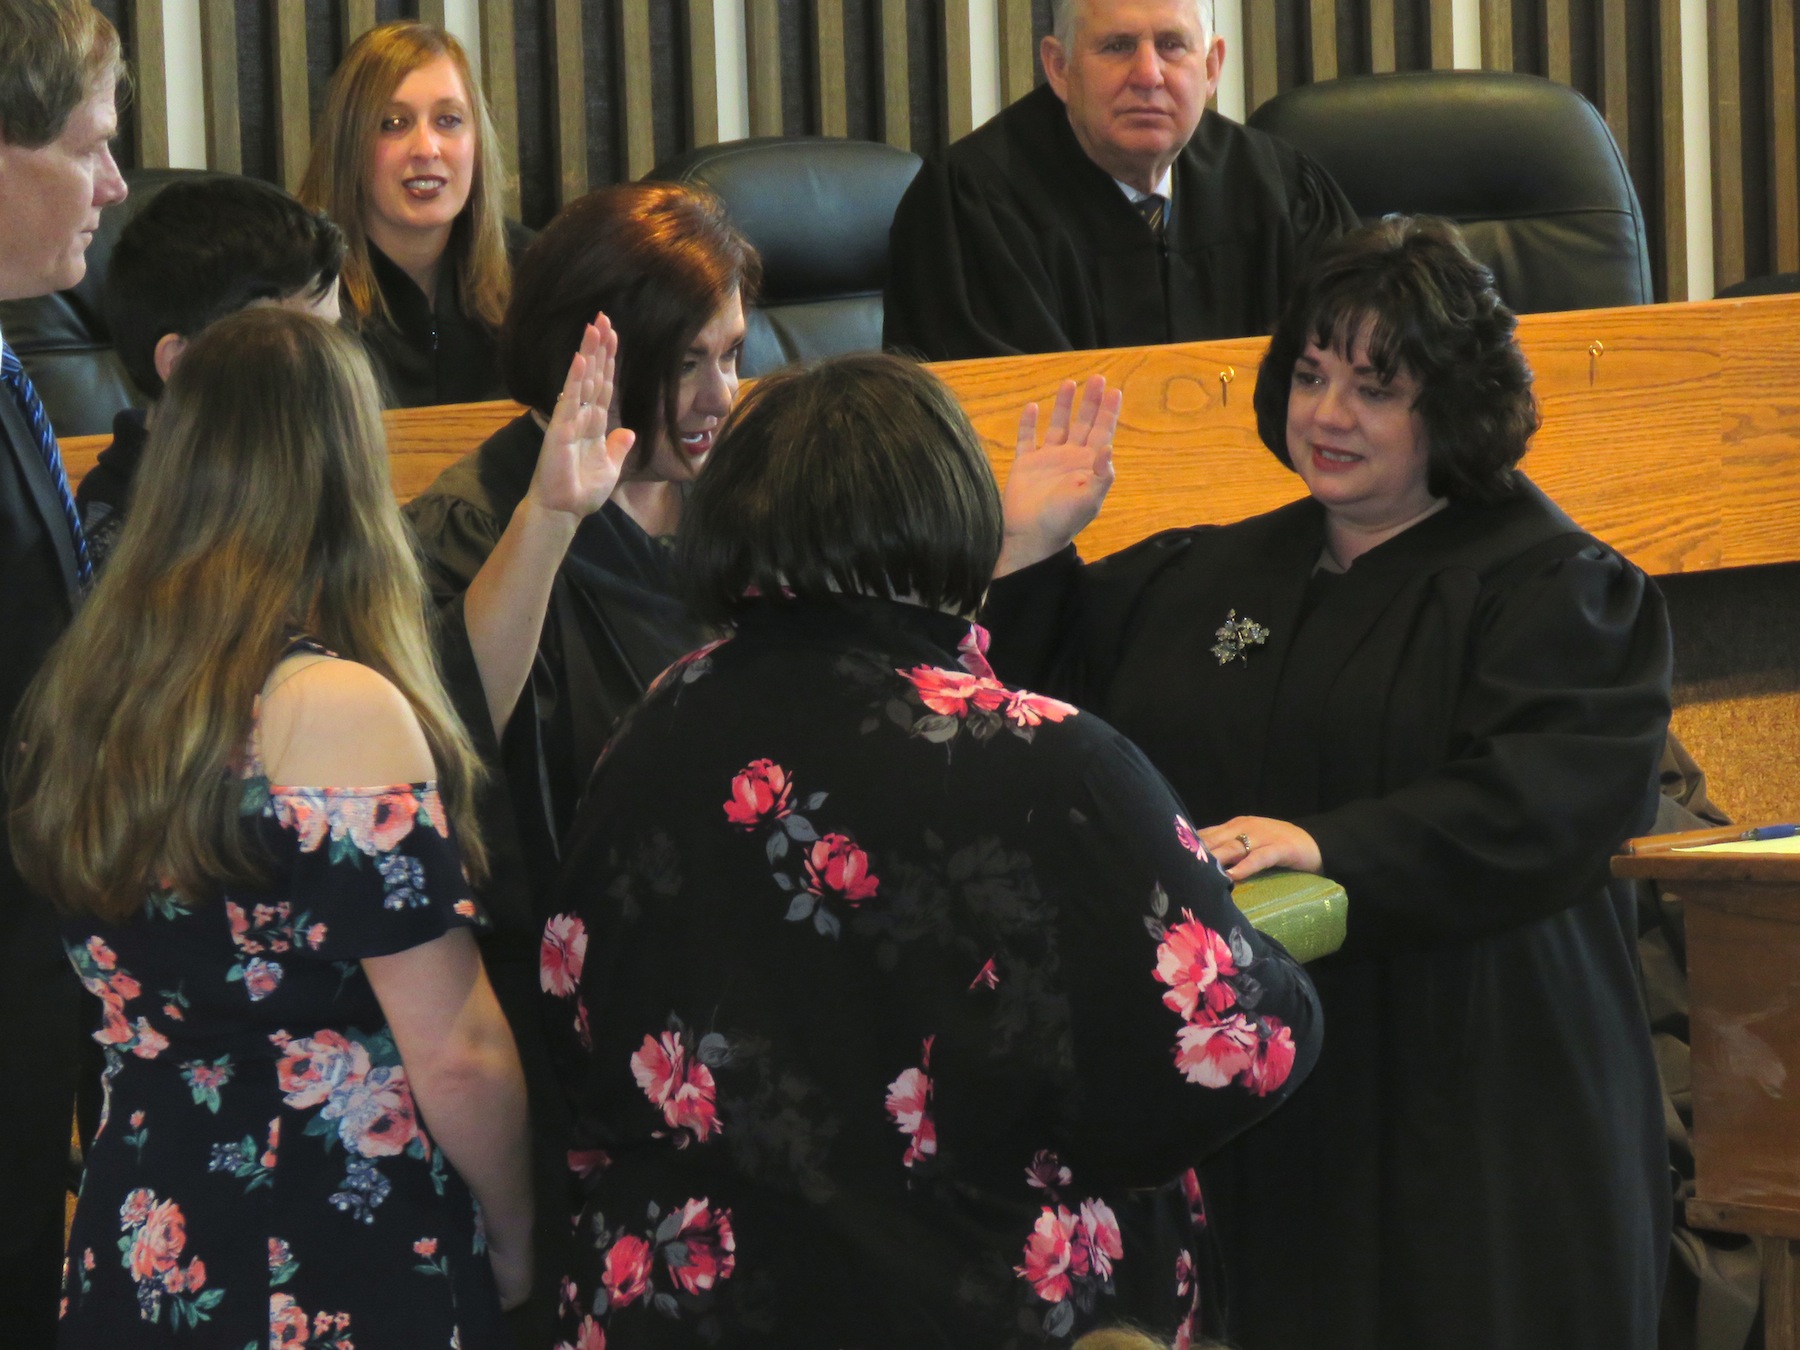 Angela Stamm-Philipps become sworn in as Wheatfield town justice by Niagara County Judge Sara Sheldon as Stamm-Philipps' mother, Audrey Stamm, holds the Bible. (Photos by David Yarger)